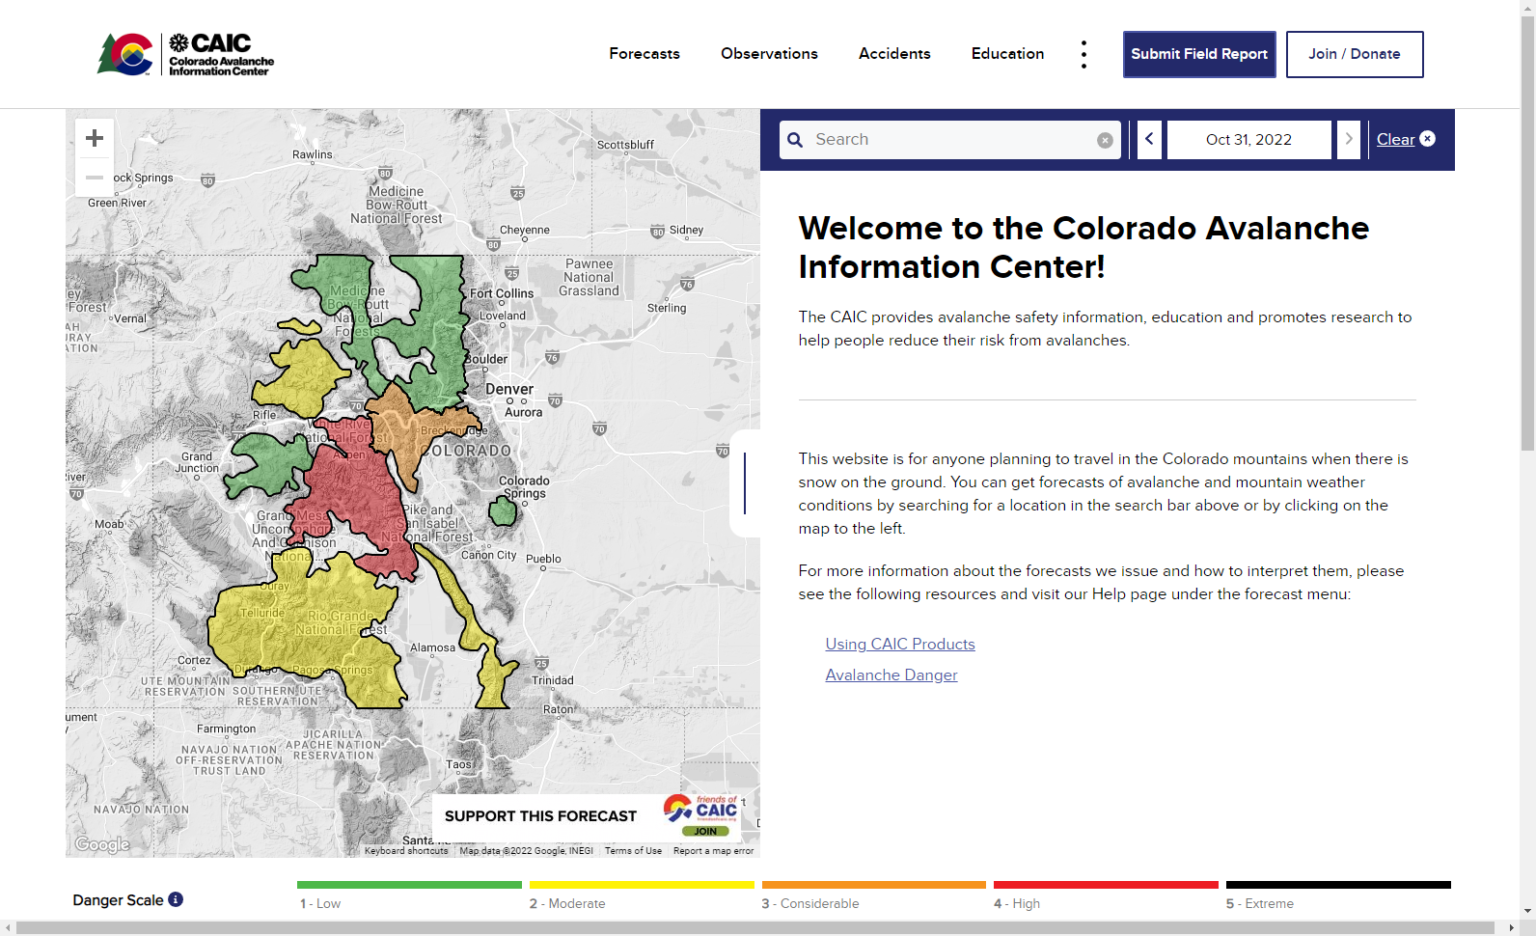 Colorado Avalanche Information Center launches new, userfriendly